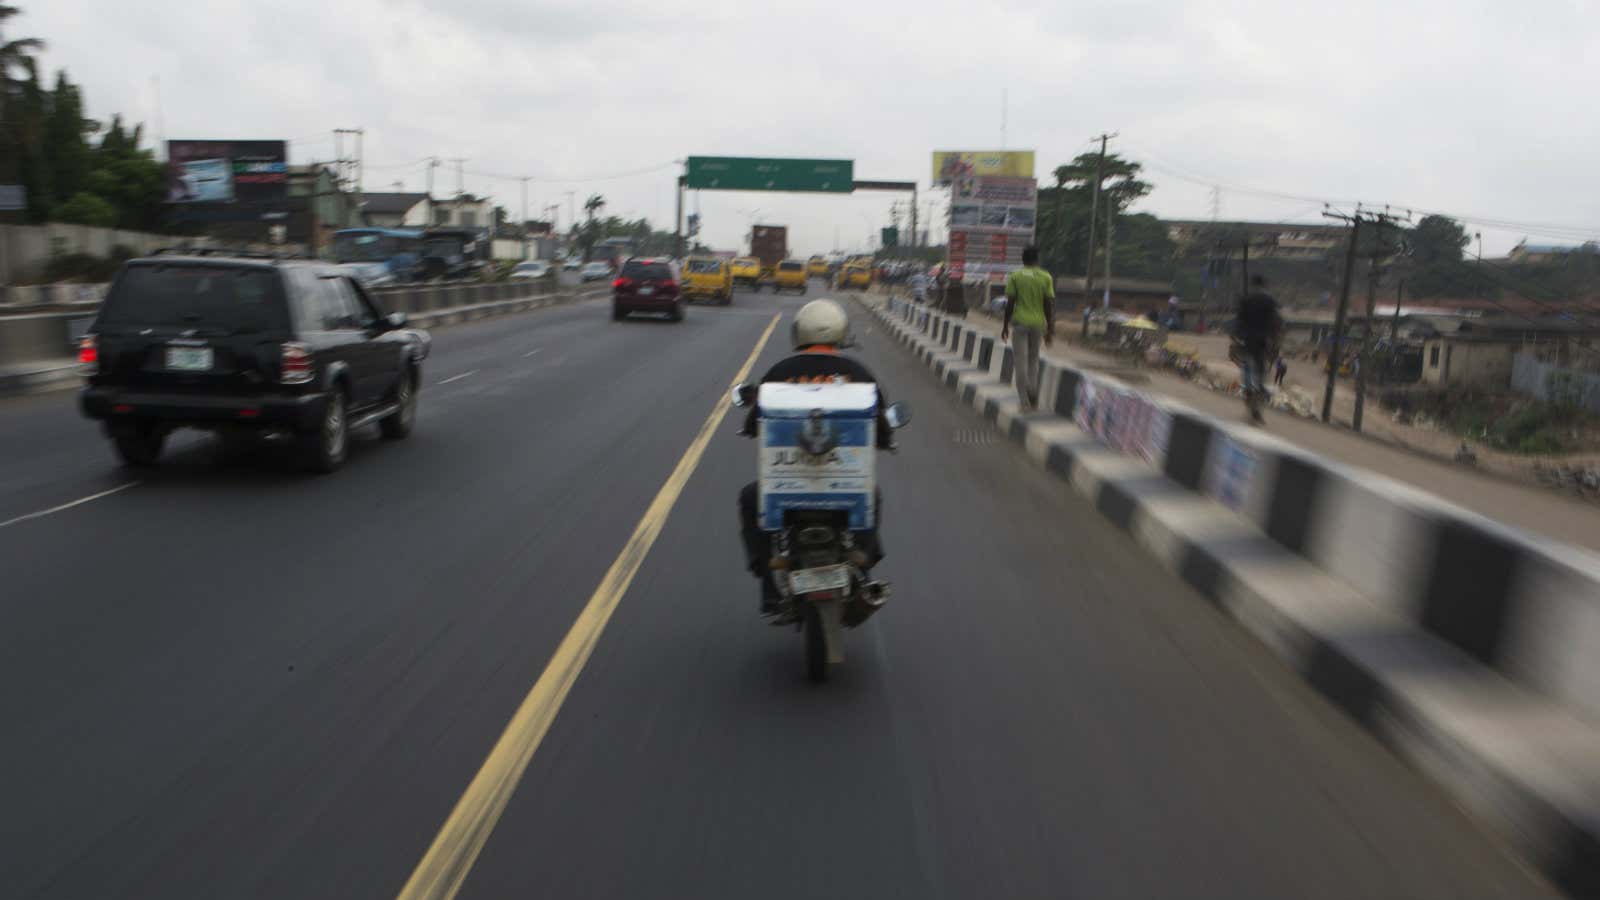 India and Nigeria must take their relationship into the fast lane.